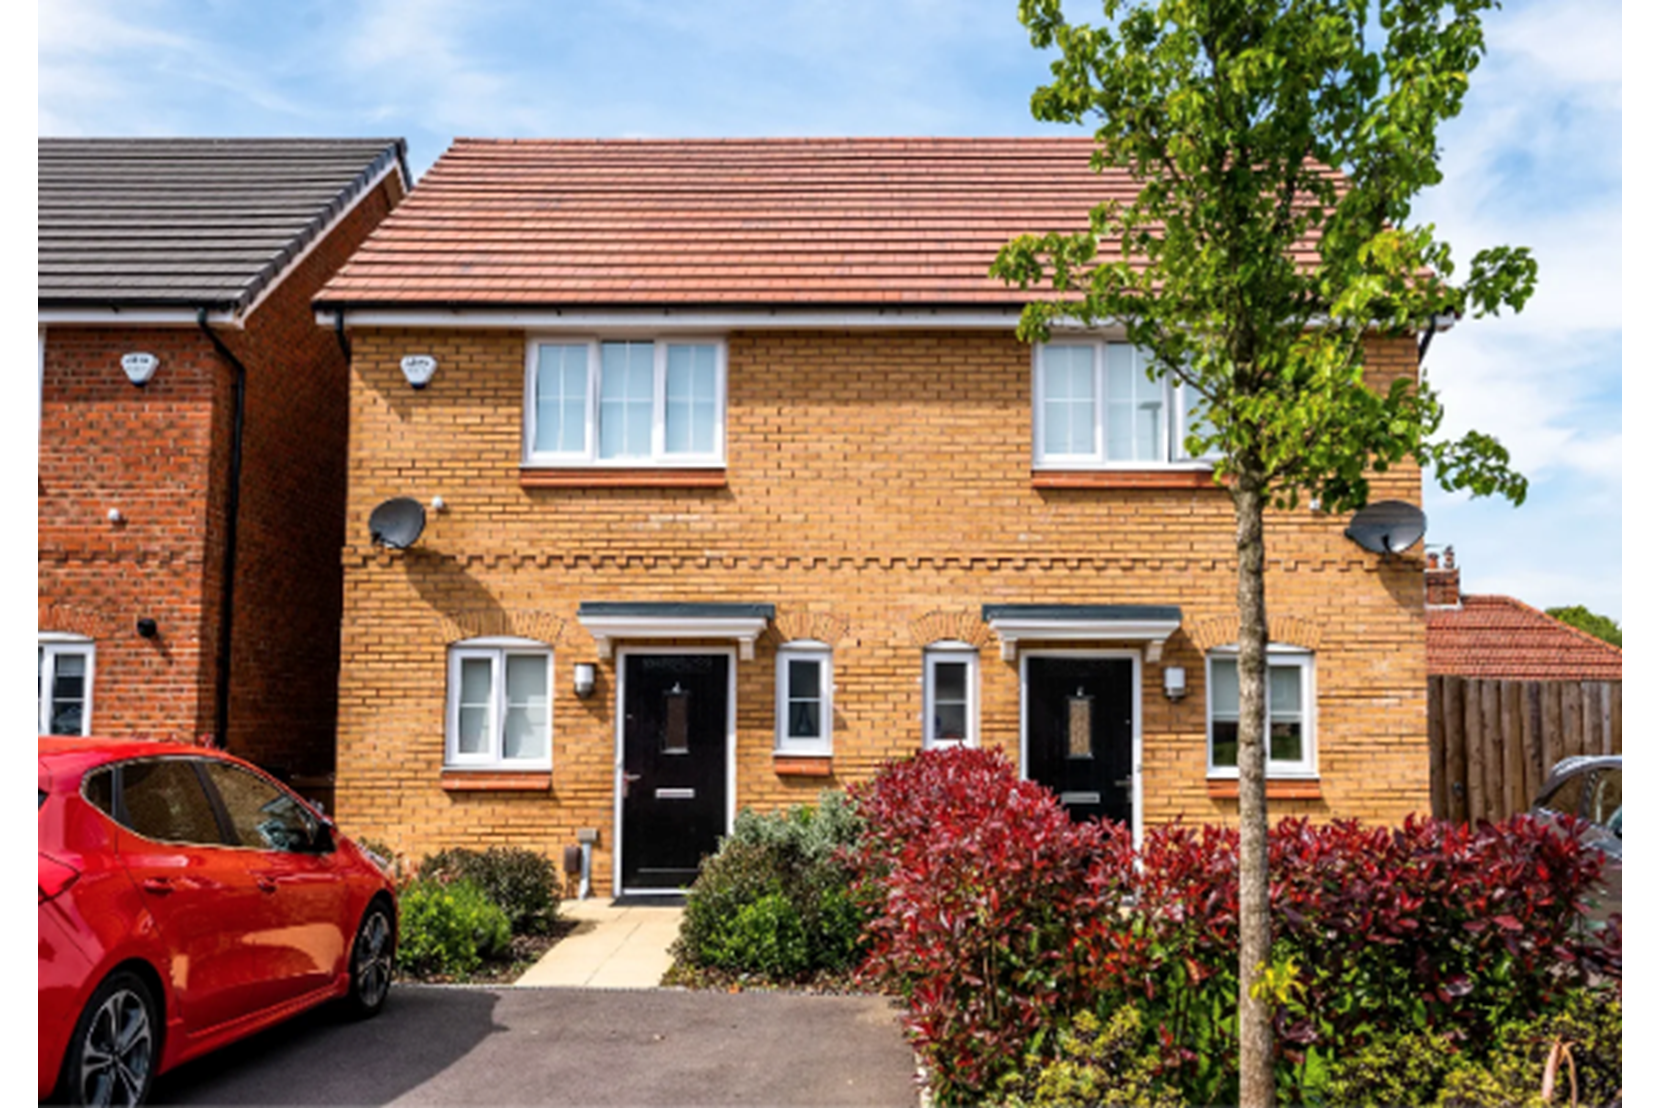 Houses to Rent by Simple Life in Sutherland Grange, Telford, TF2, development panoramic